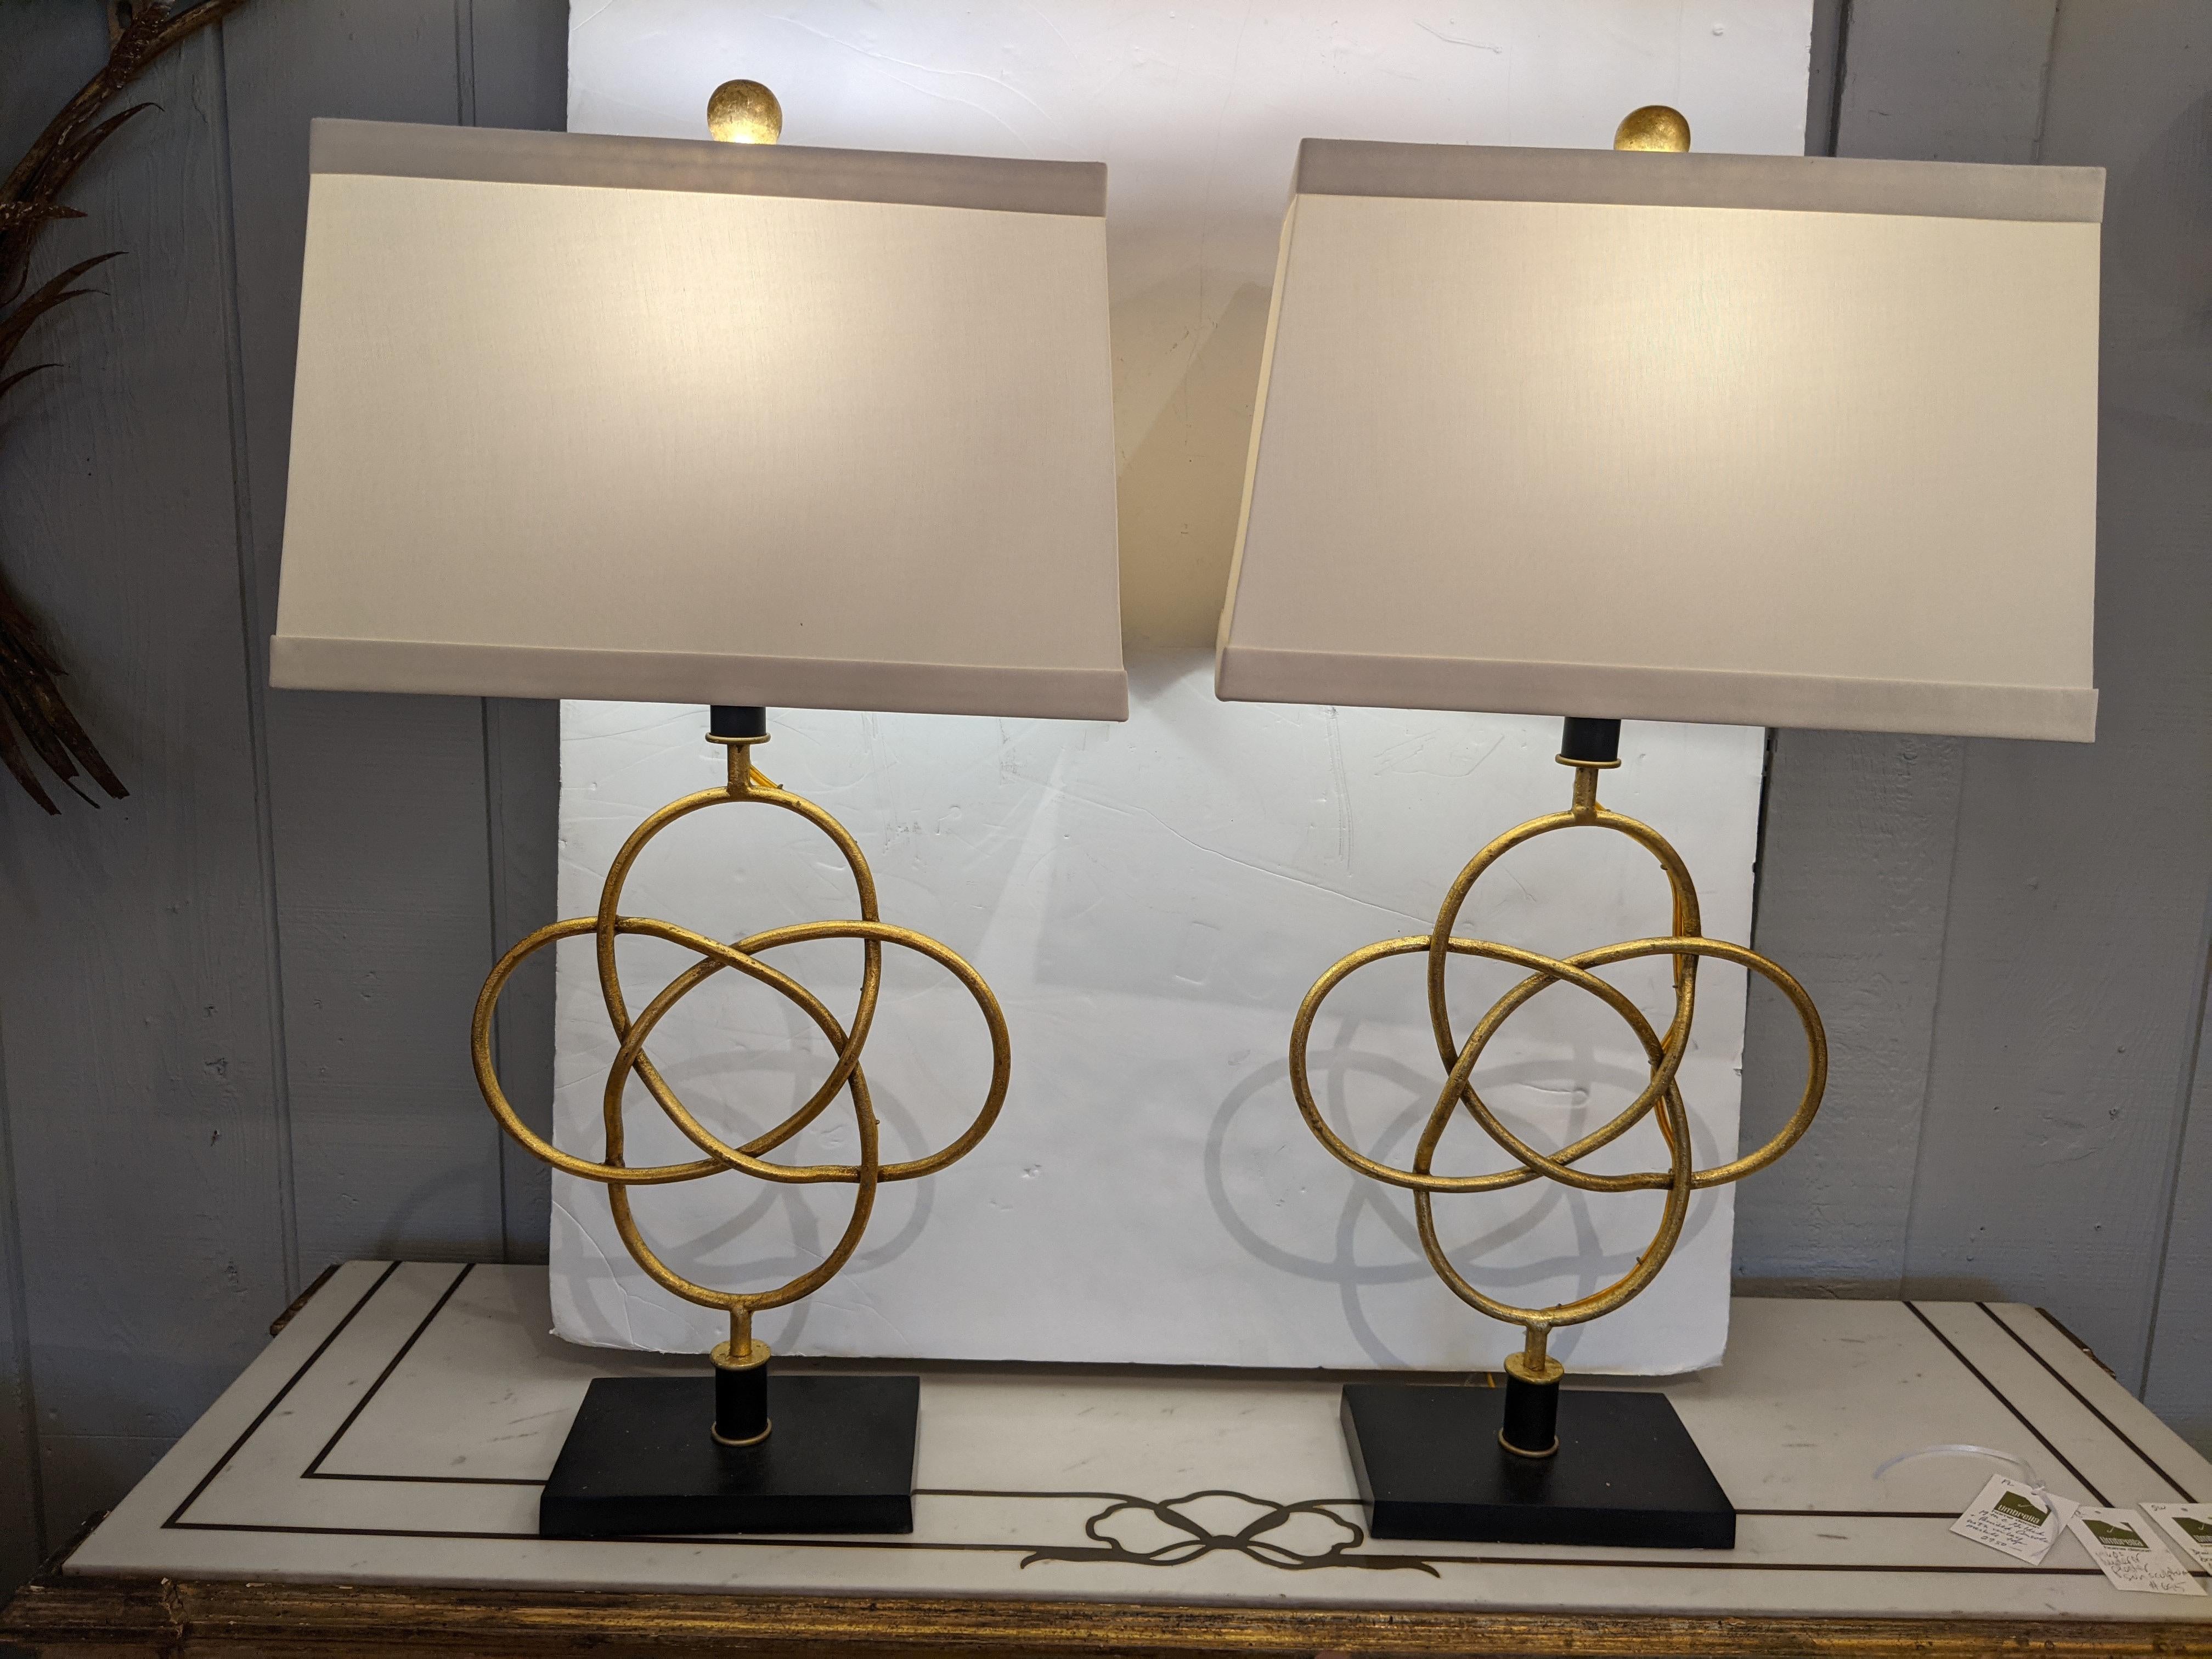 Beautiful pair of contemporary lamps having gilt metal sculptural overlapping ovals on a black base. Custom shades included.
lamps are 13